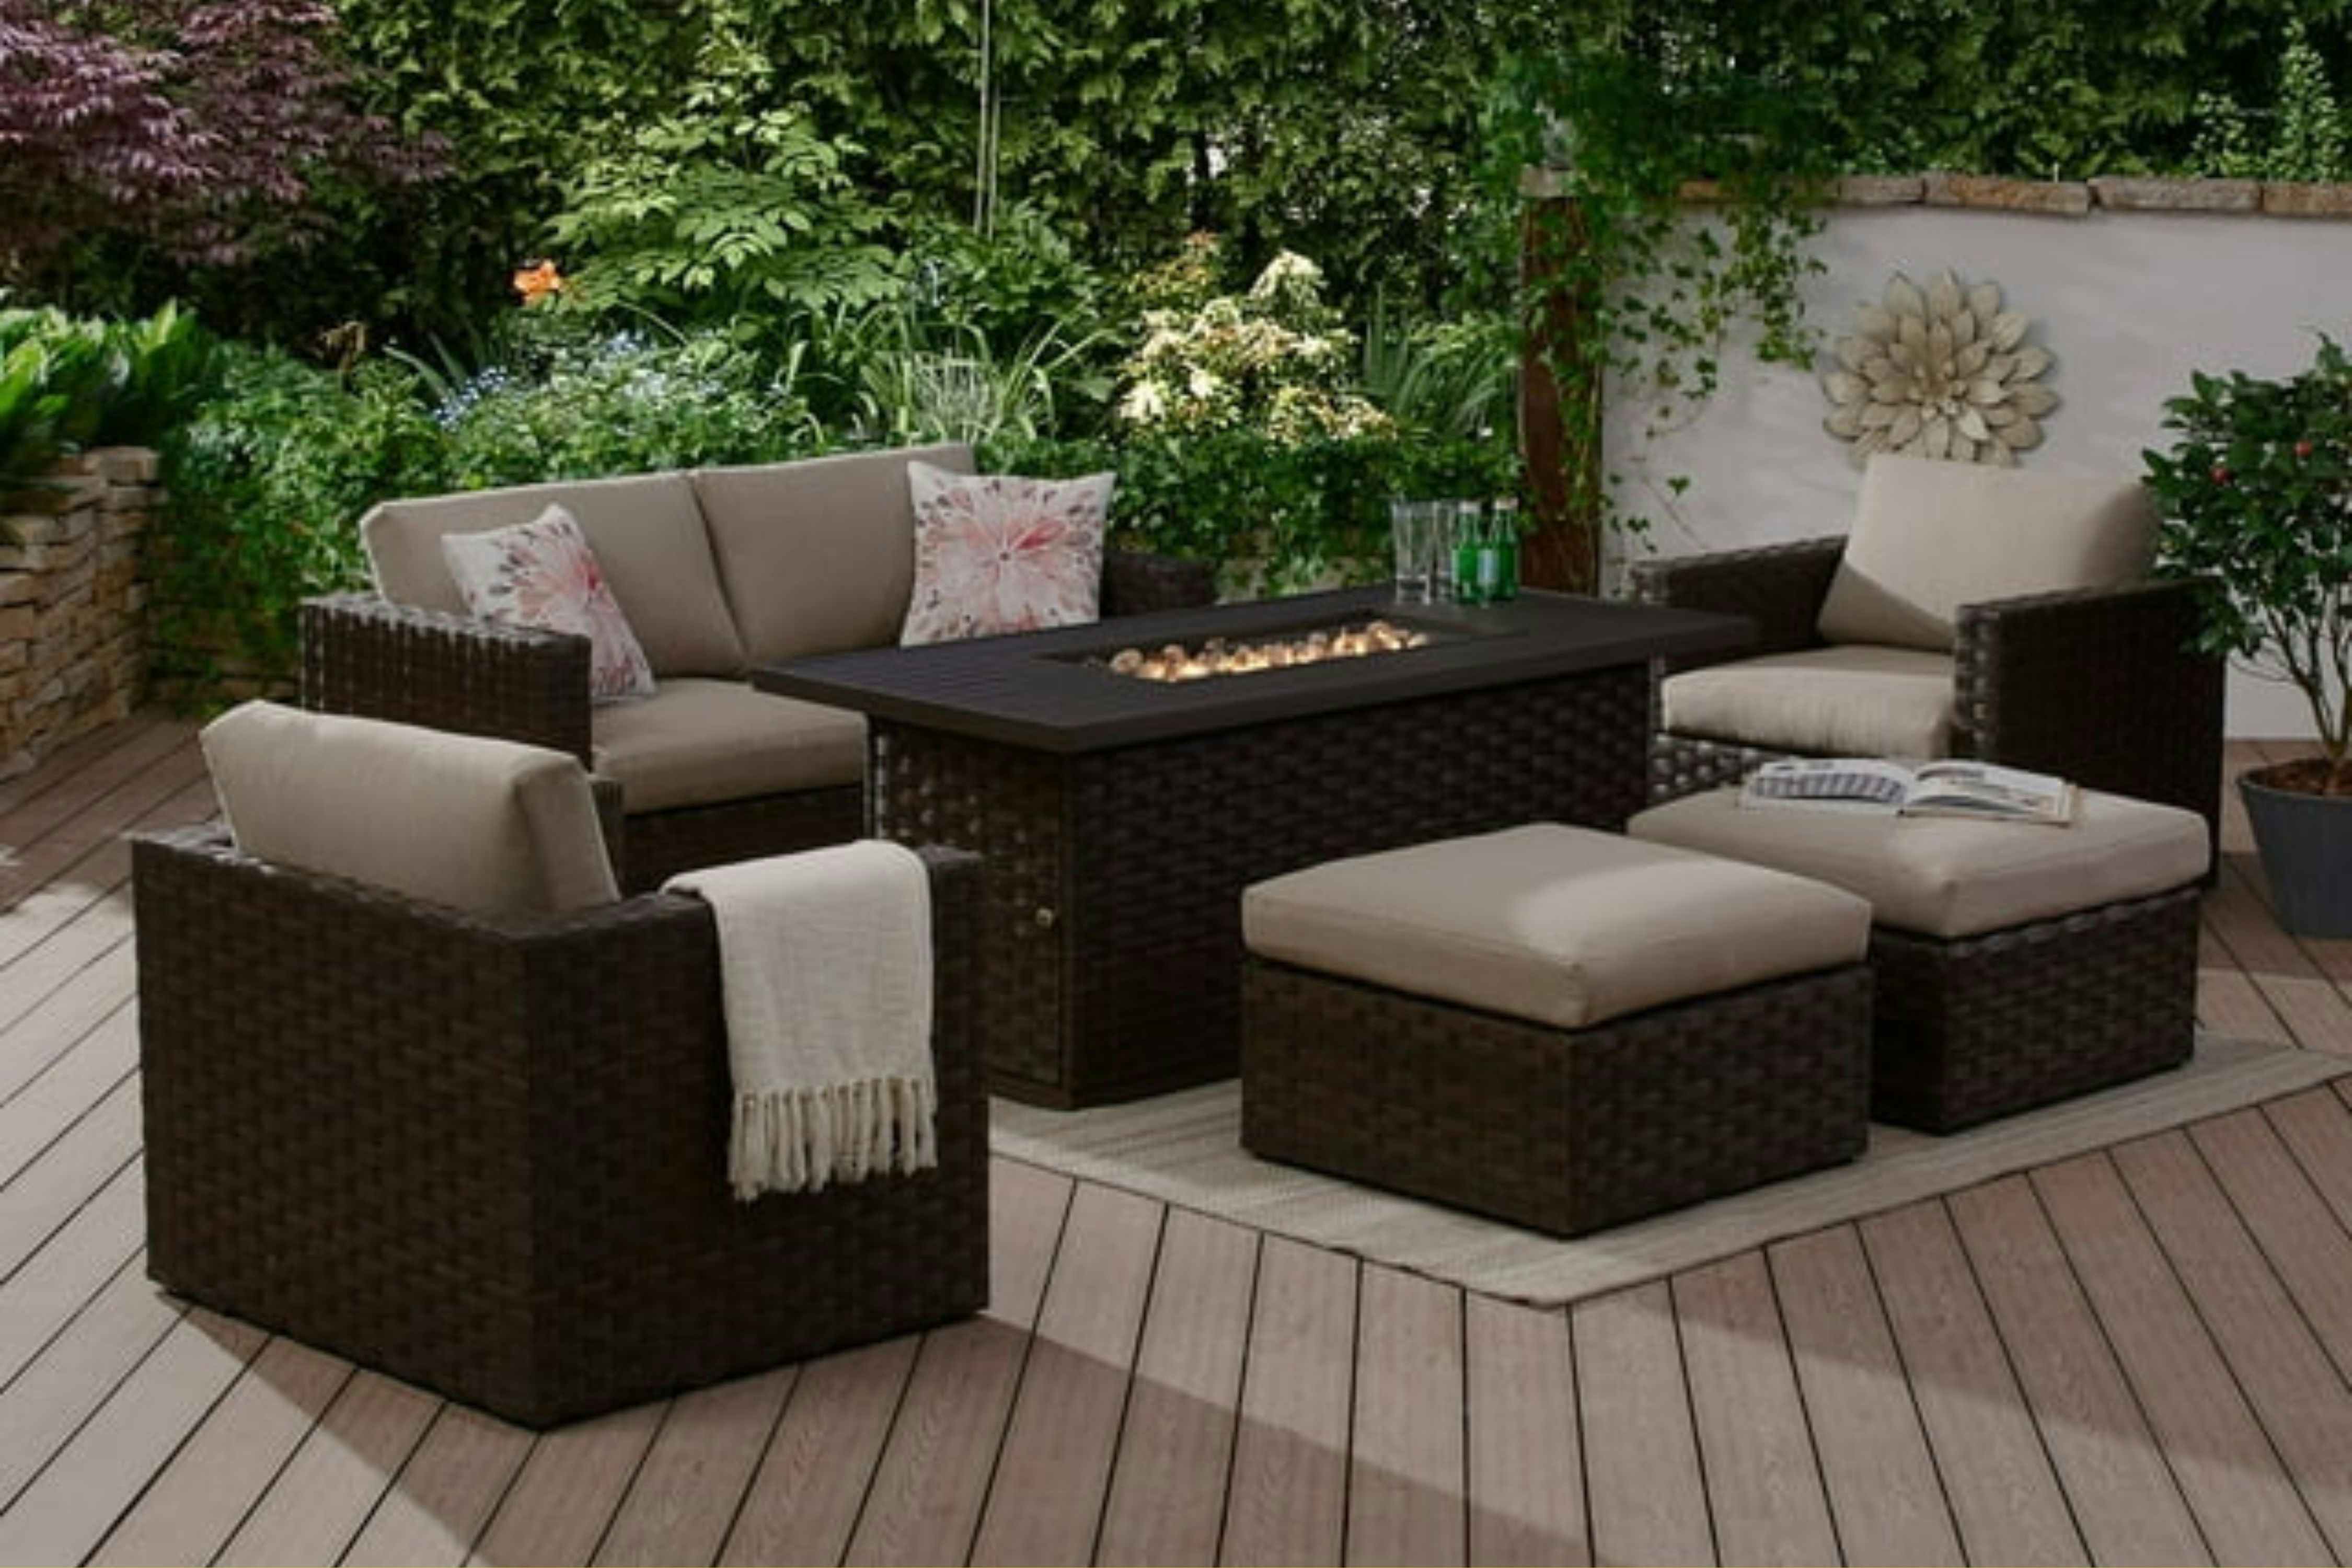 Score a Fire Pit Dining Table for Only $124 at Walmart (Reg. $247)